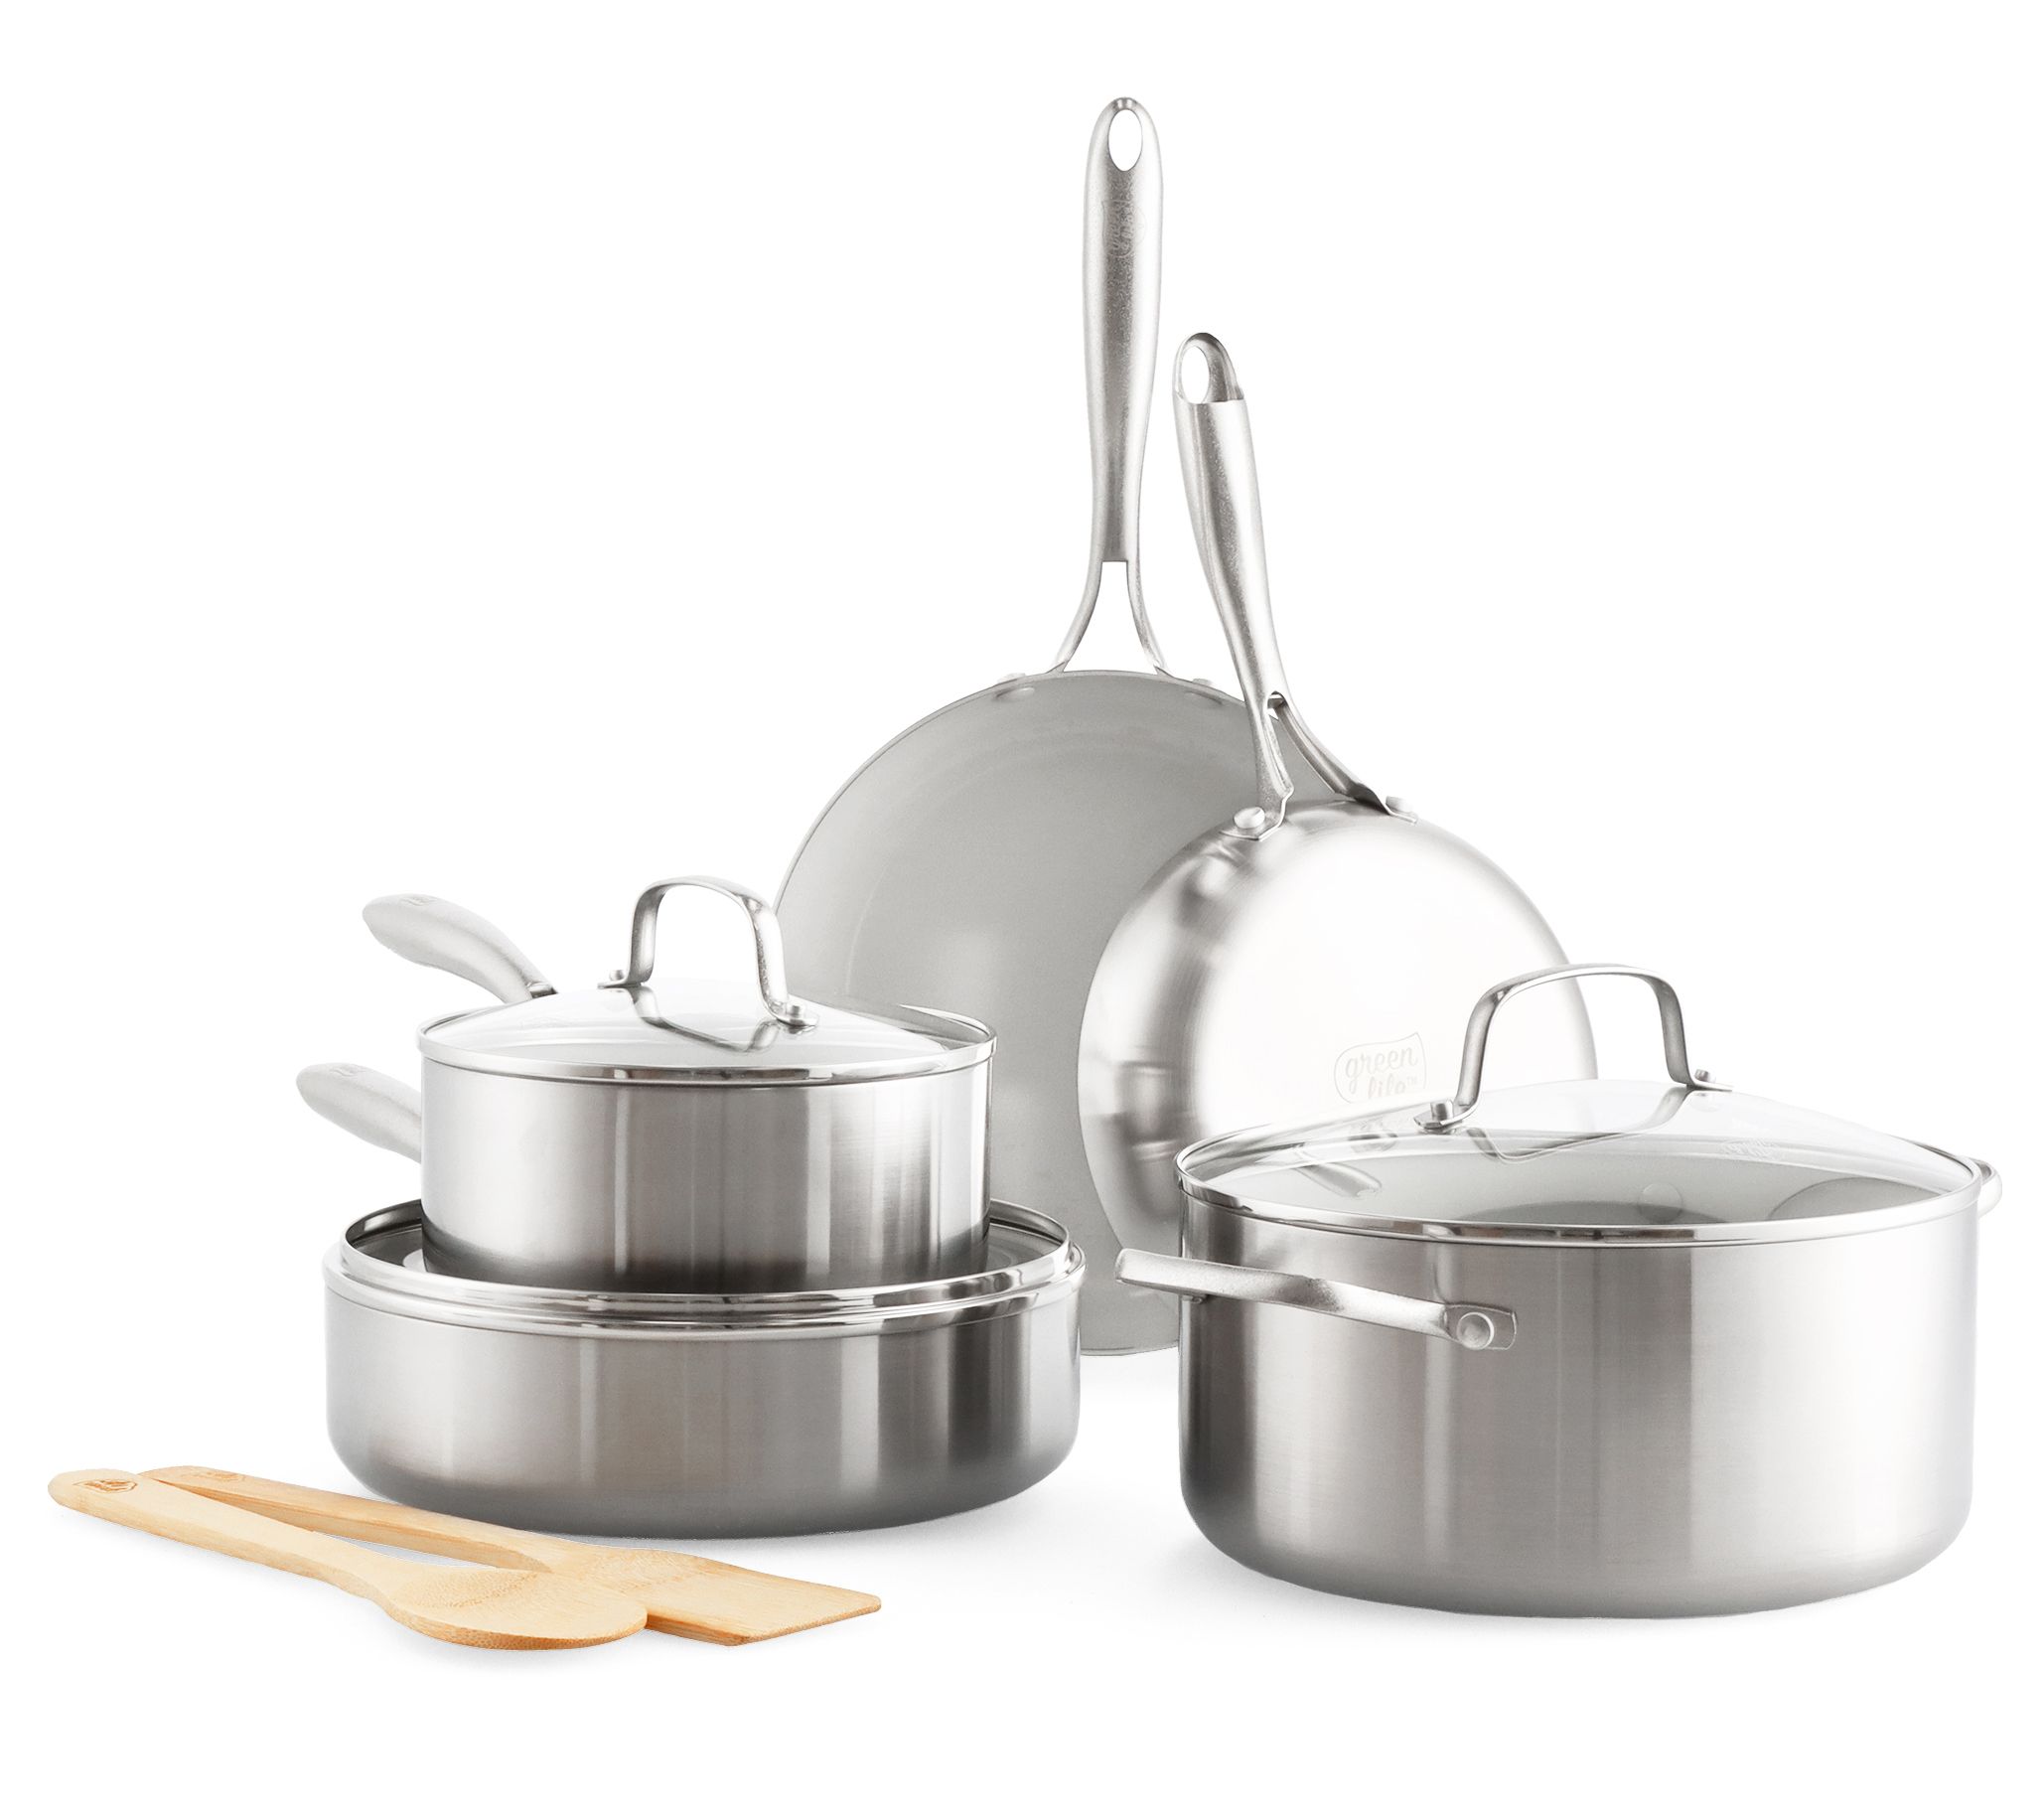 KitchenAid Cookware SS 10pc Candy Apple